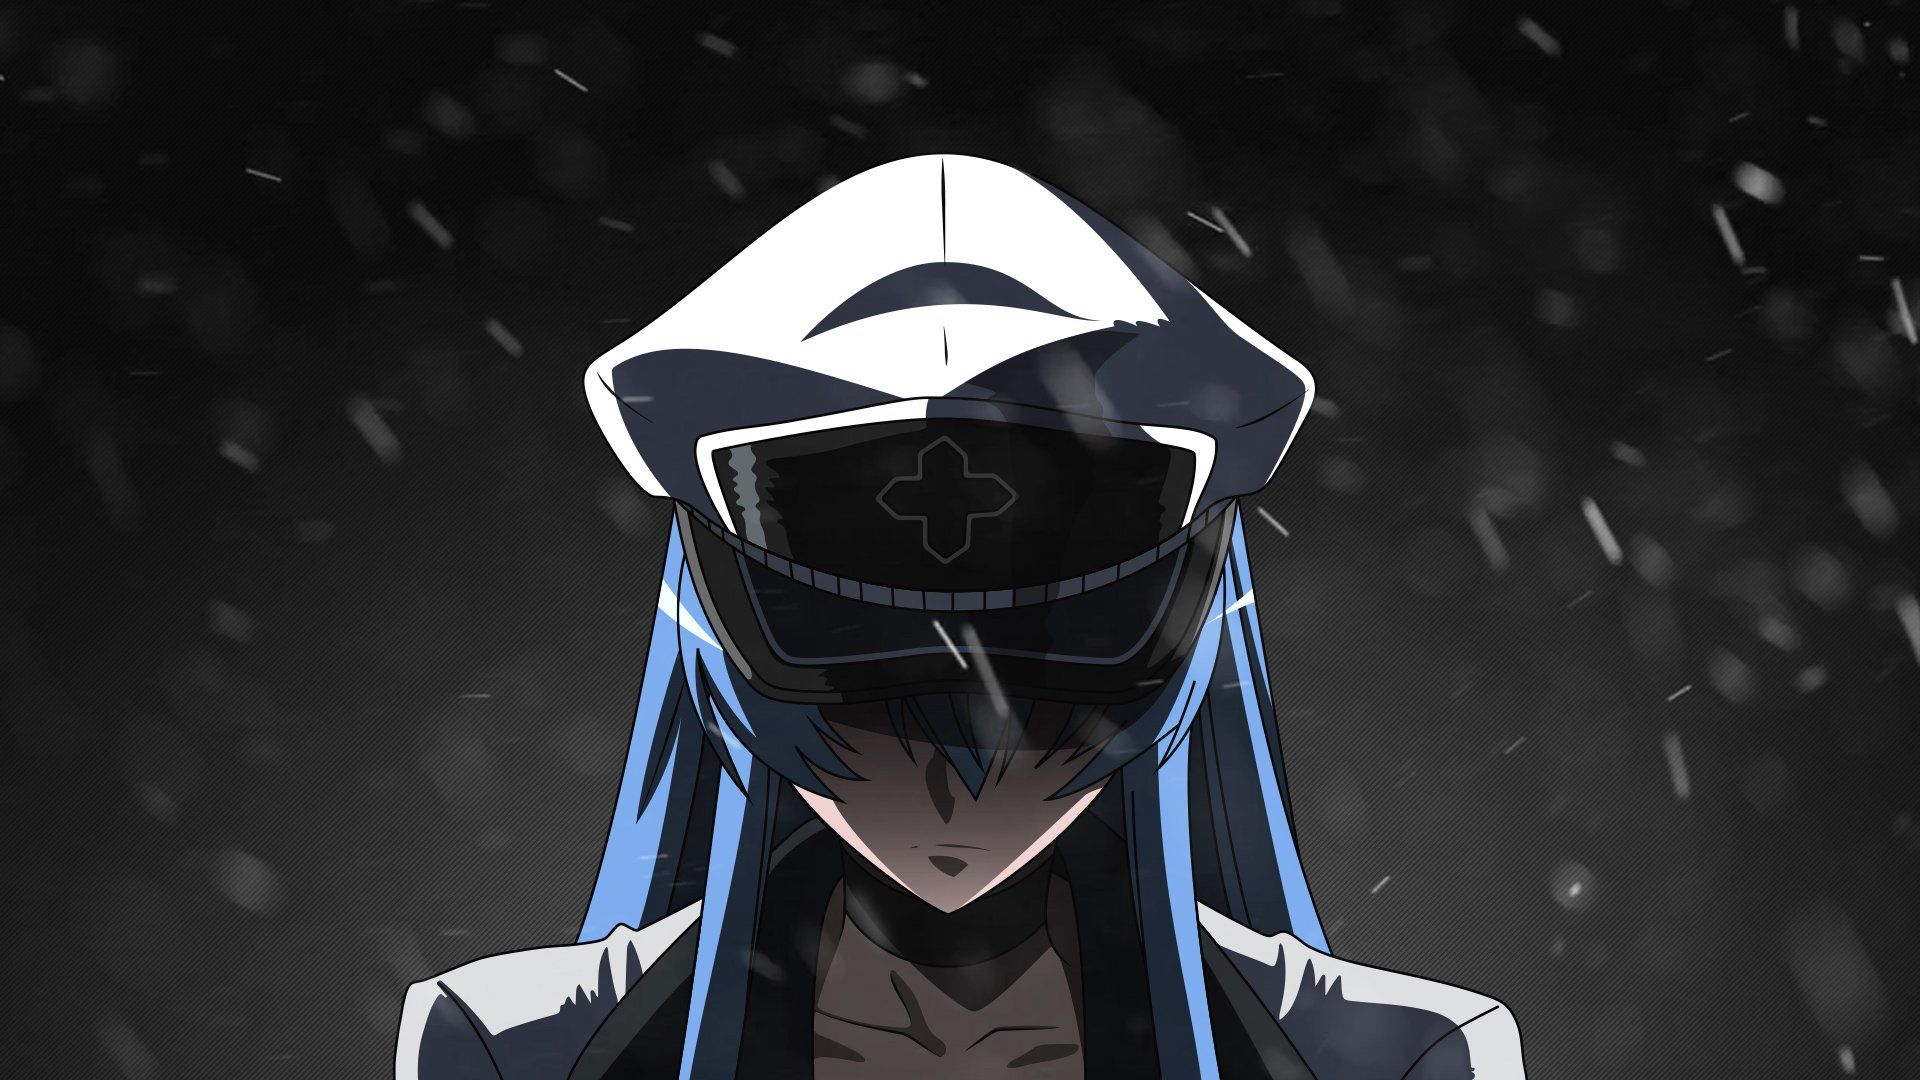 Esdeath, the ice-wielding general from 